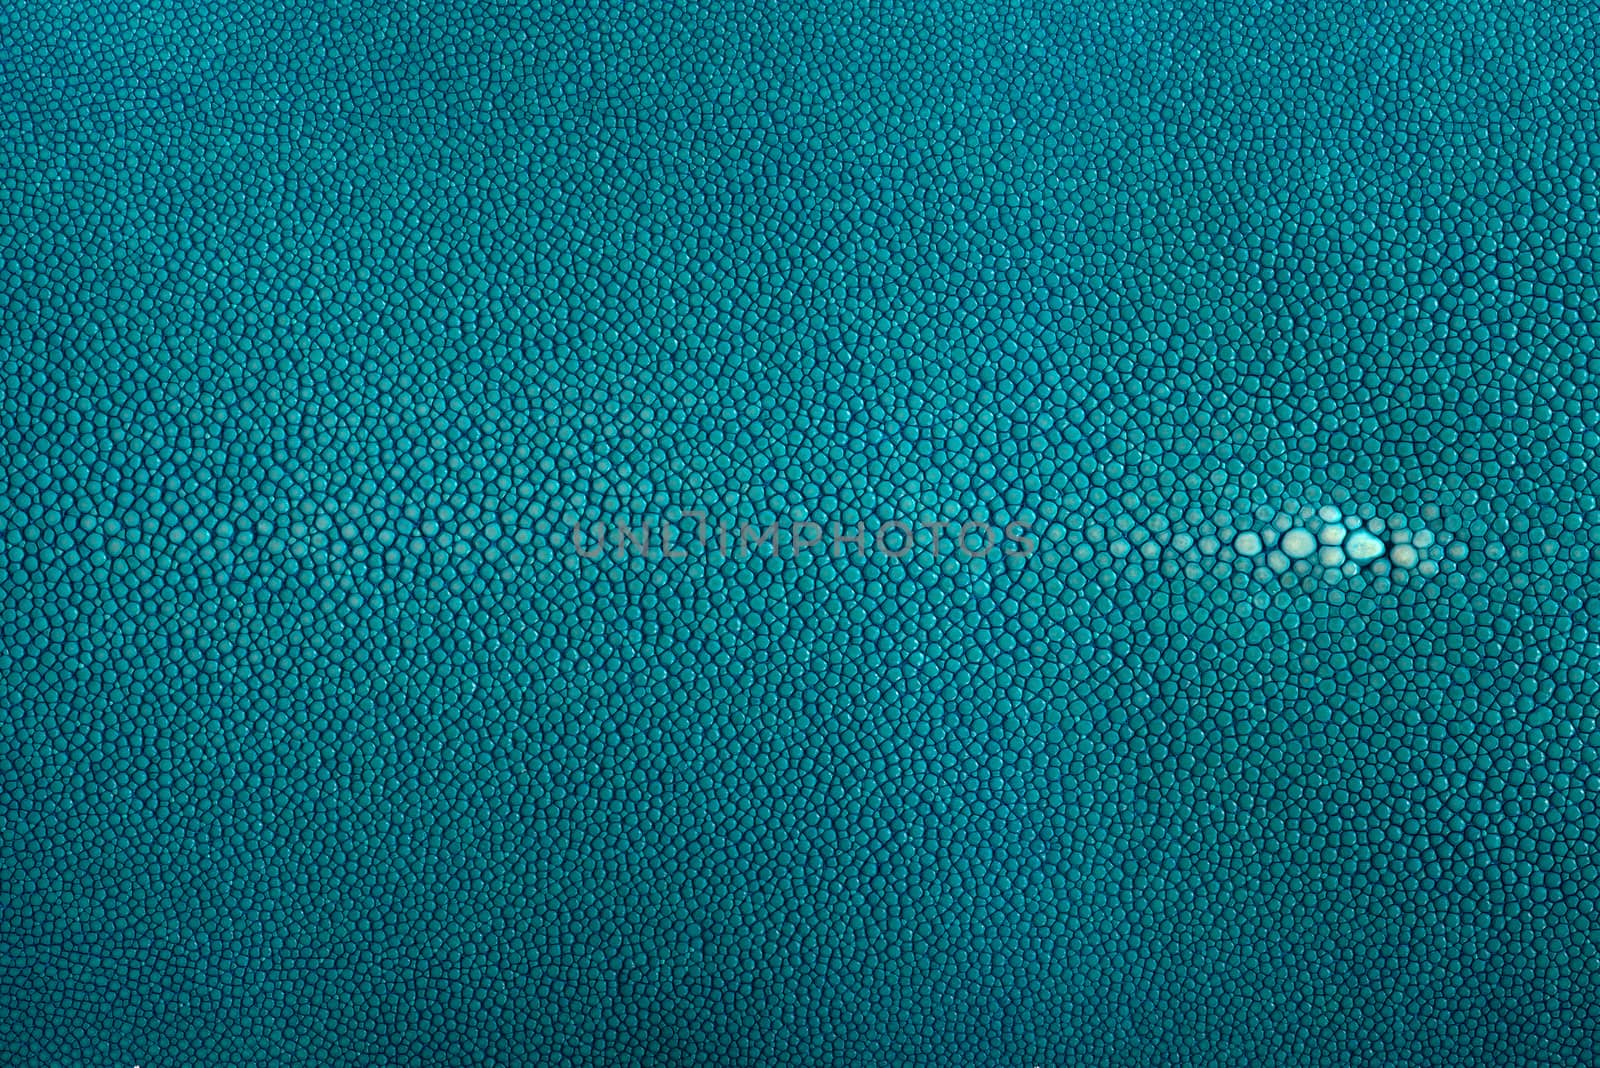 Stingray exotic fish leather, hide in turquoise color skin